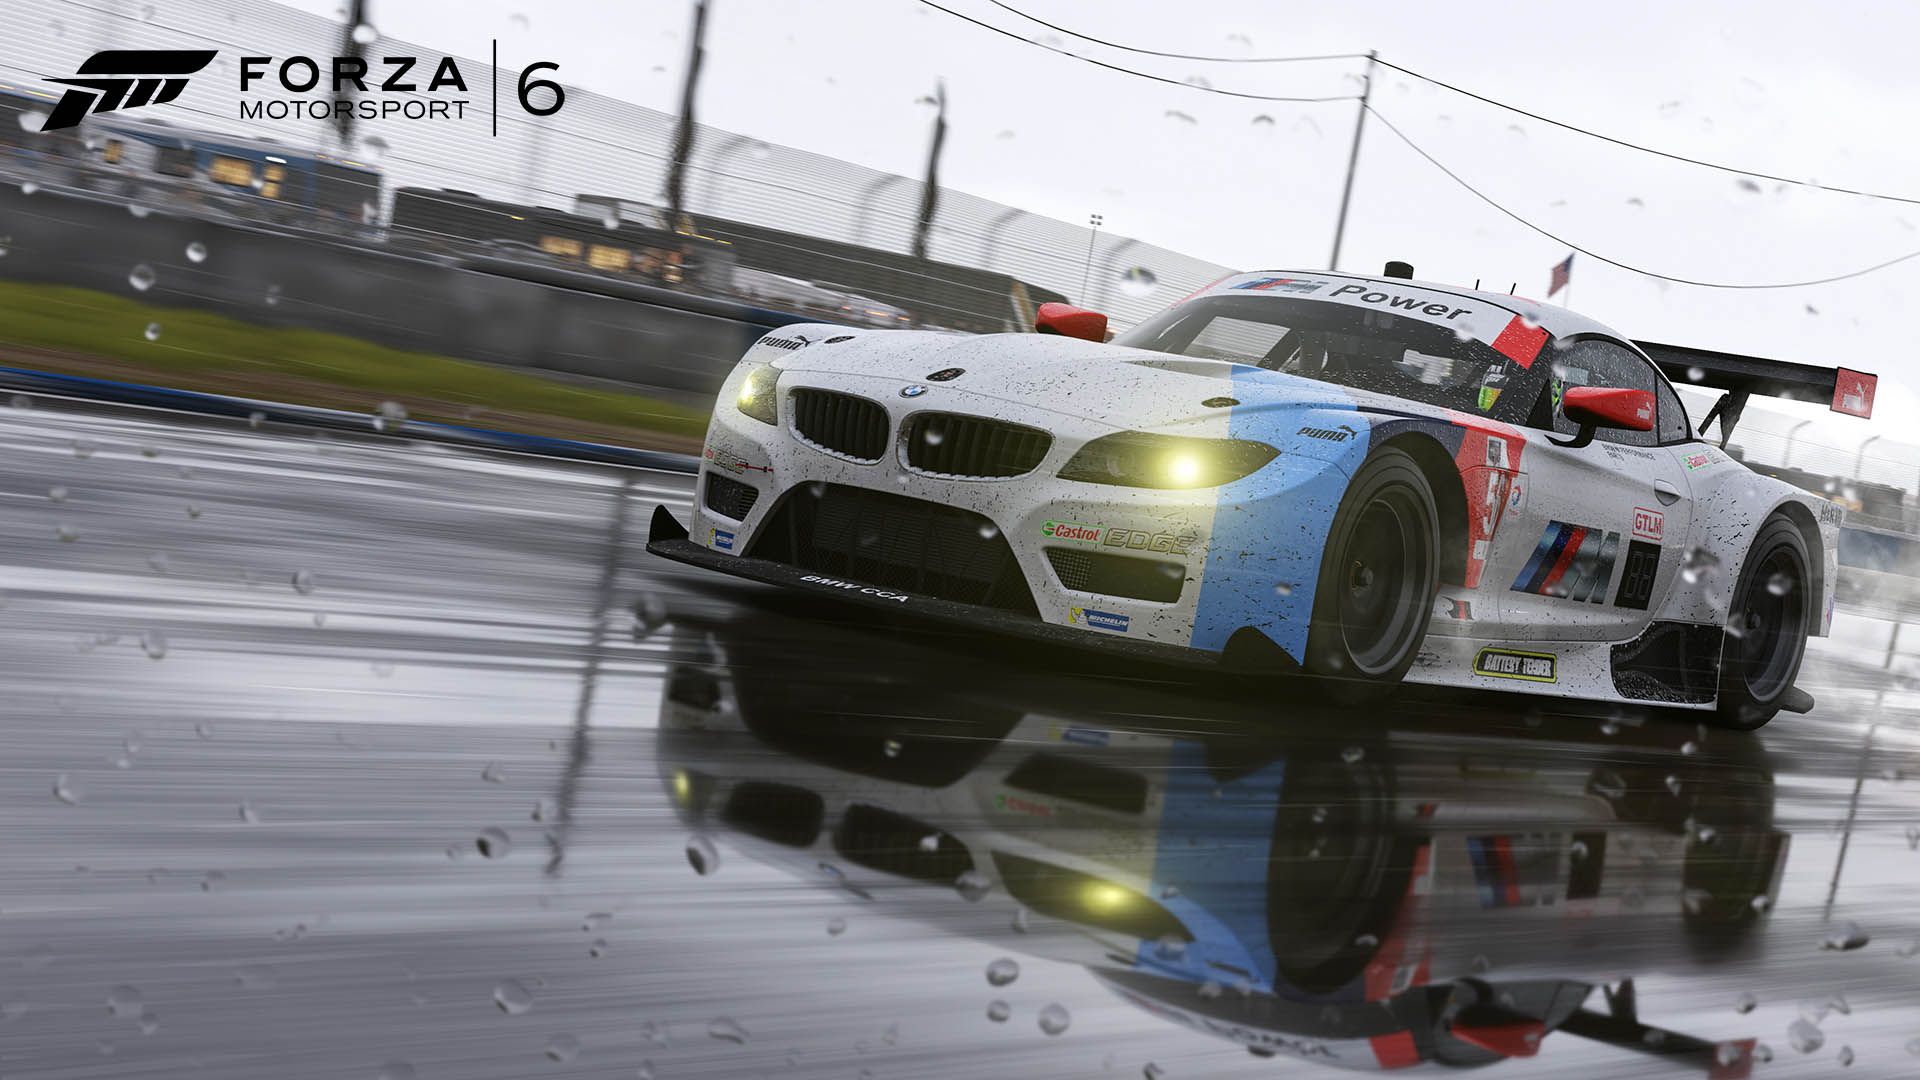 forza motorsport 6 review image 1